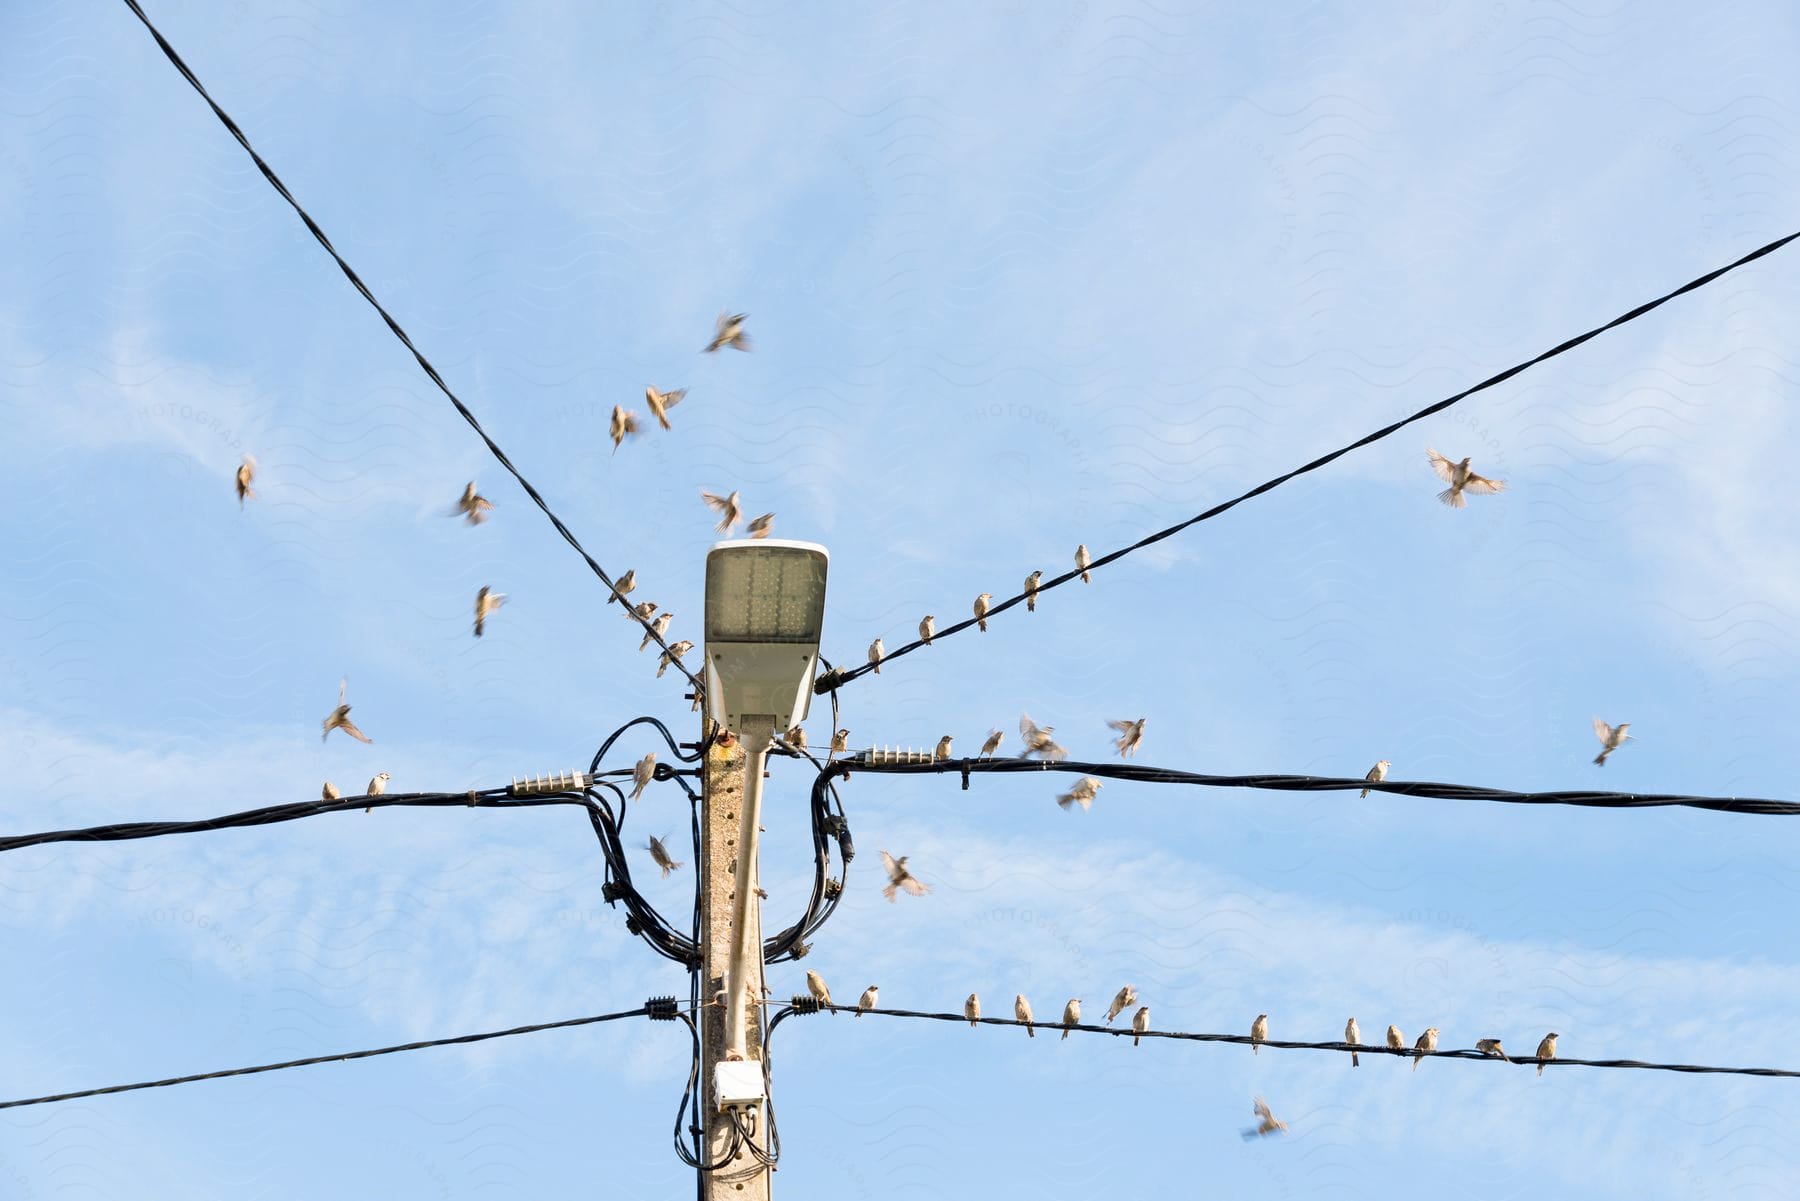 A lot of birds sitting on a power line